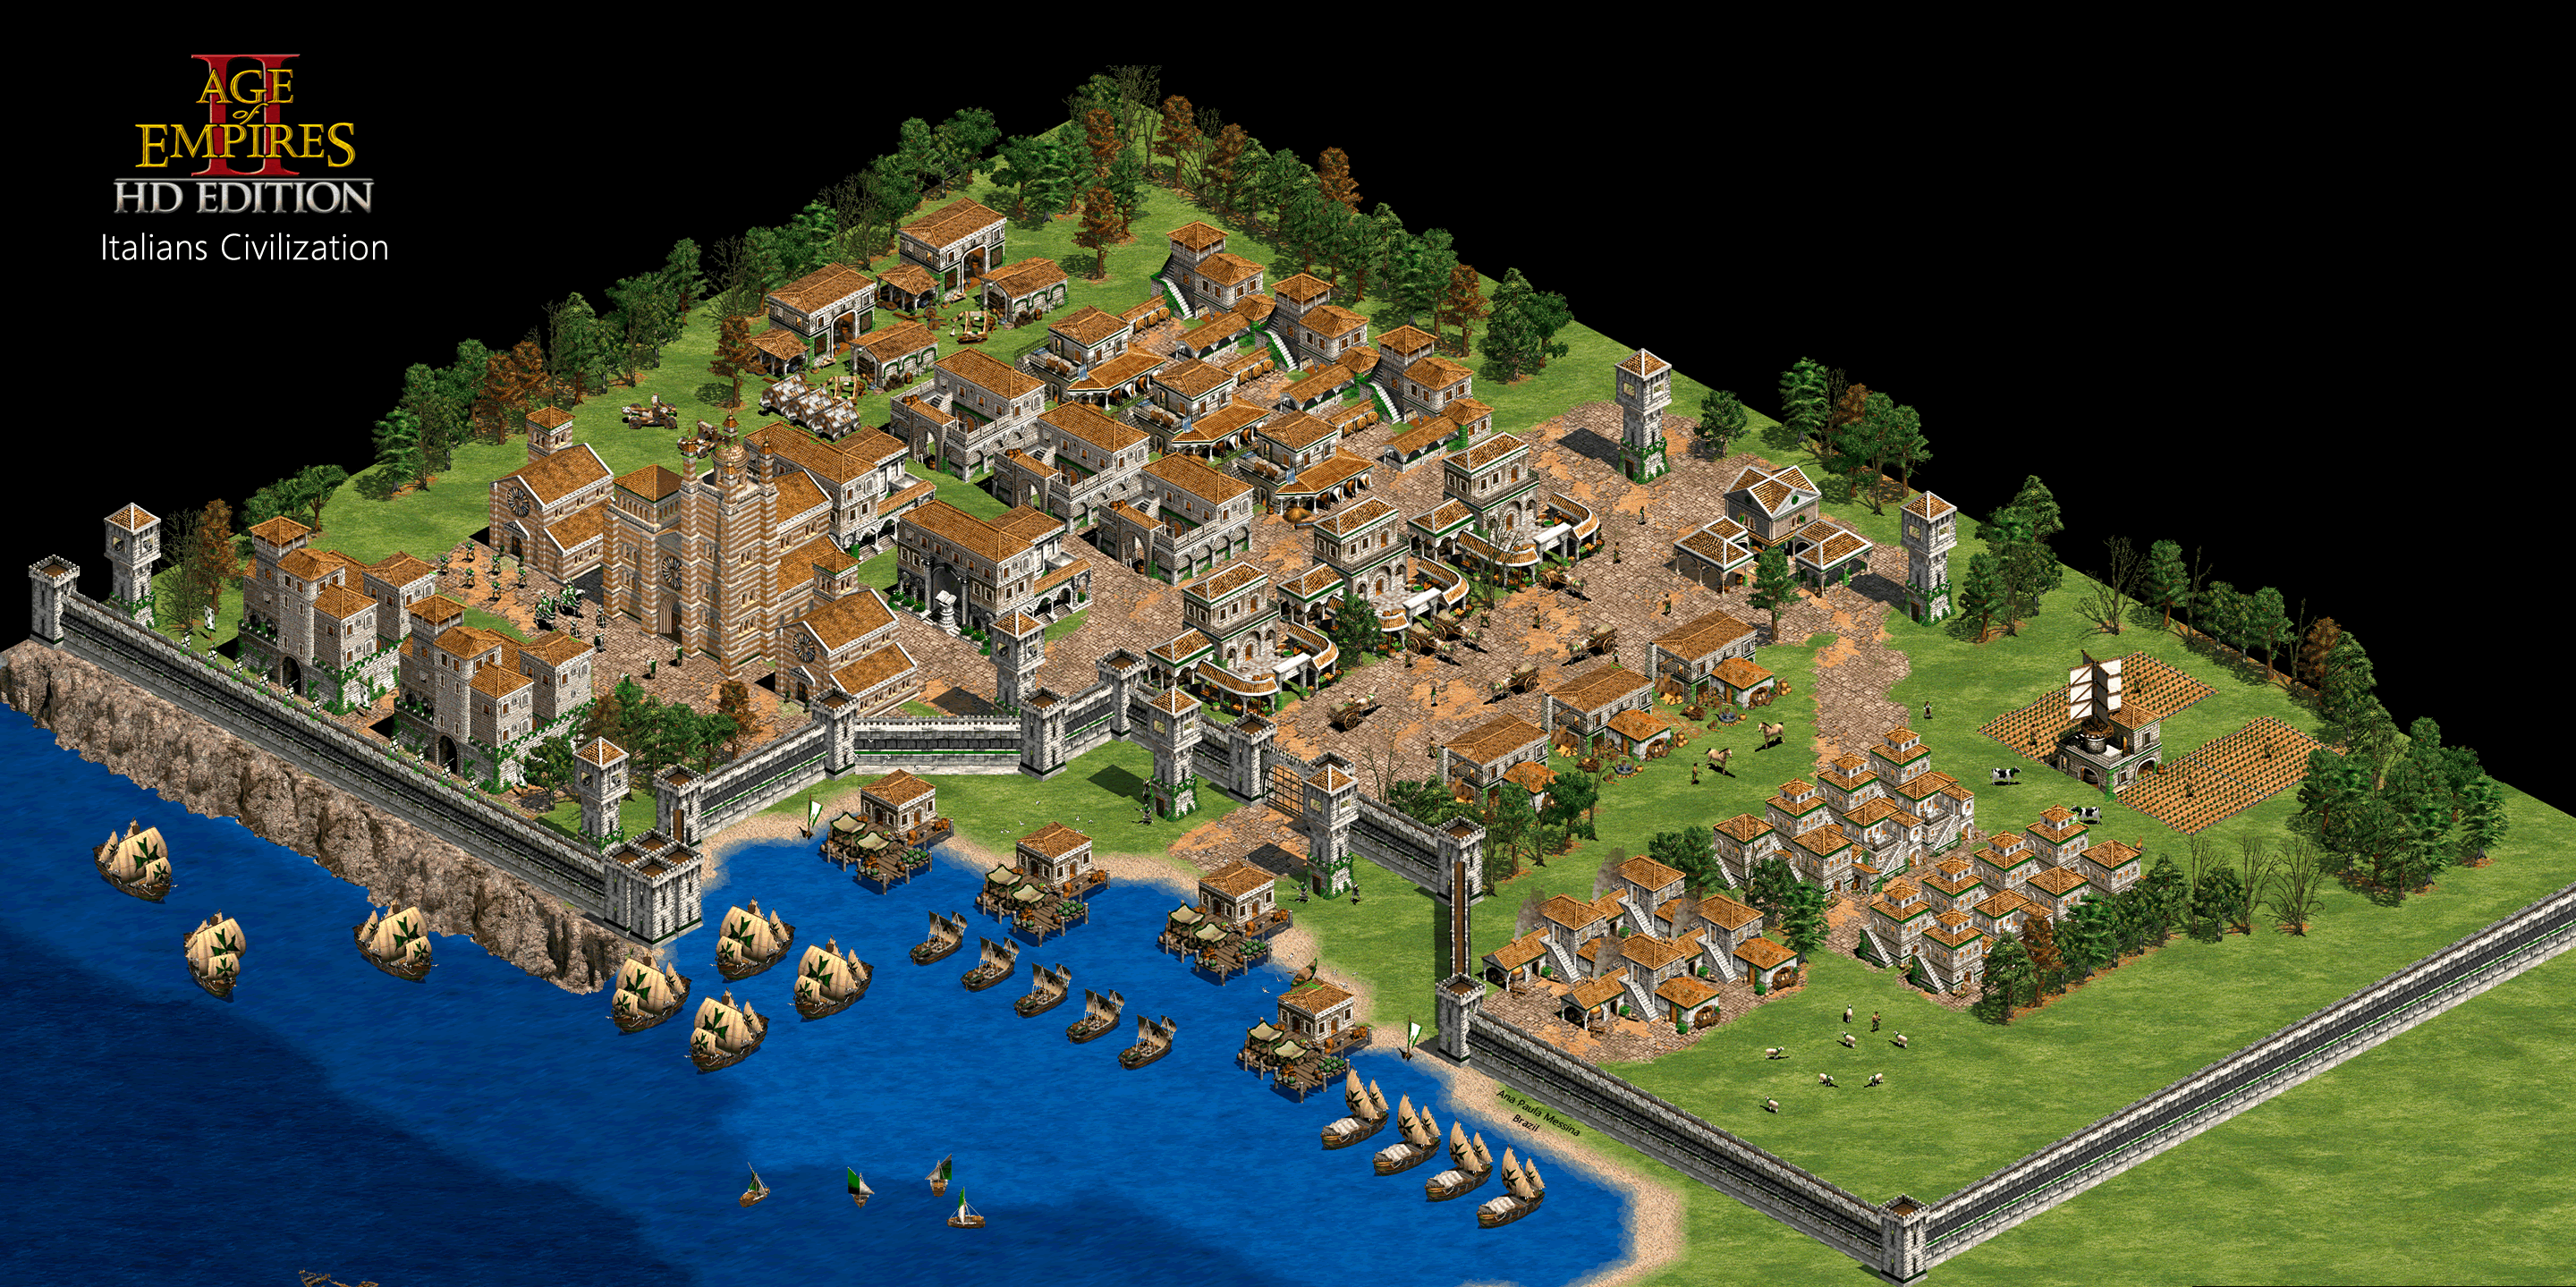 Age Of Empires Ii Italians Civilization By Anamessina-d9z1xrh - Docas Age Of Empires 2 - HD Wallpaper 